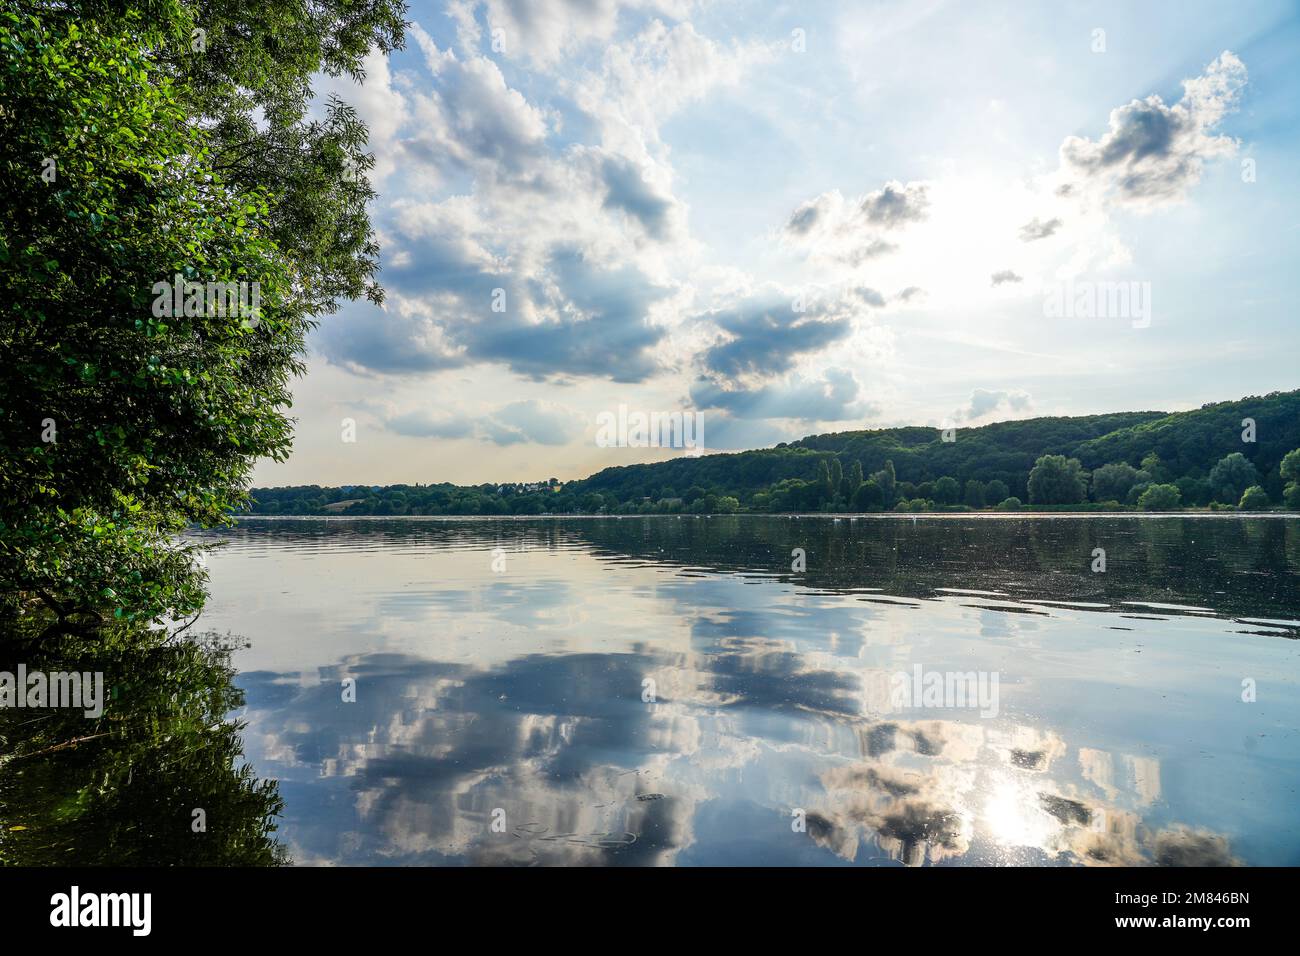 Kemnader See in the evening. Ruhr reservoir with surrounding nature. Landscape with a lake near Bochum in the Ruhr area. Stock Photo